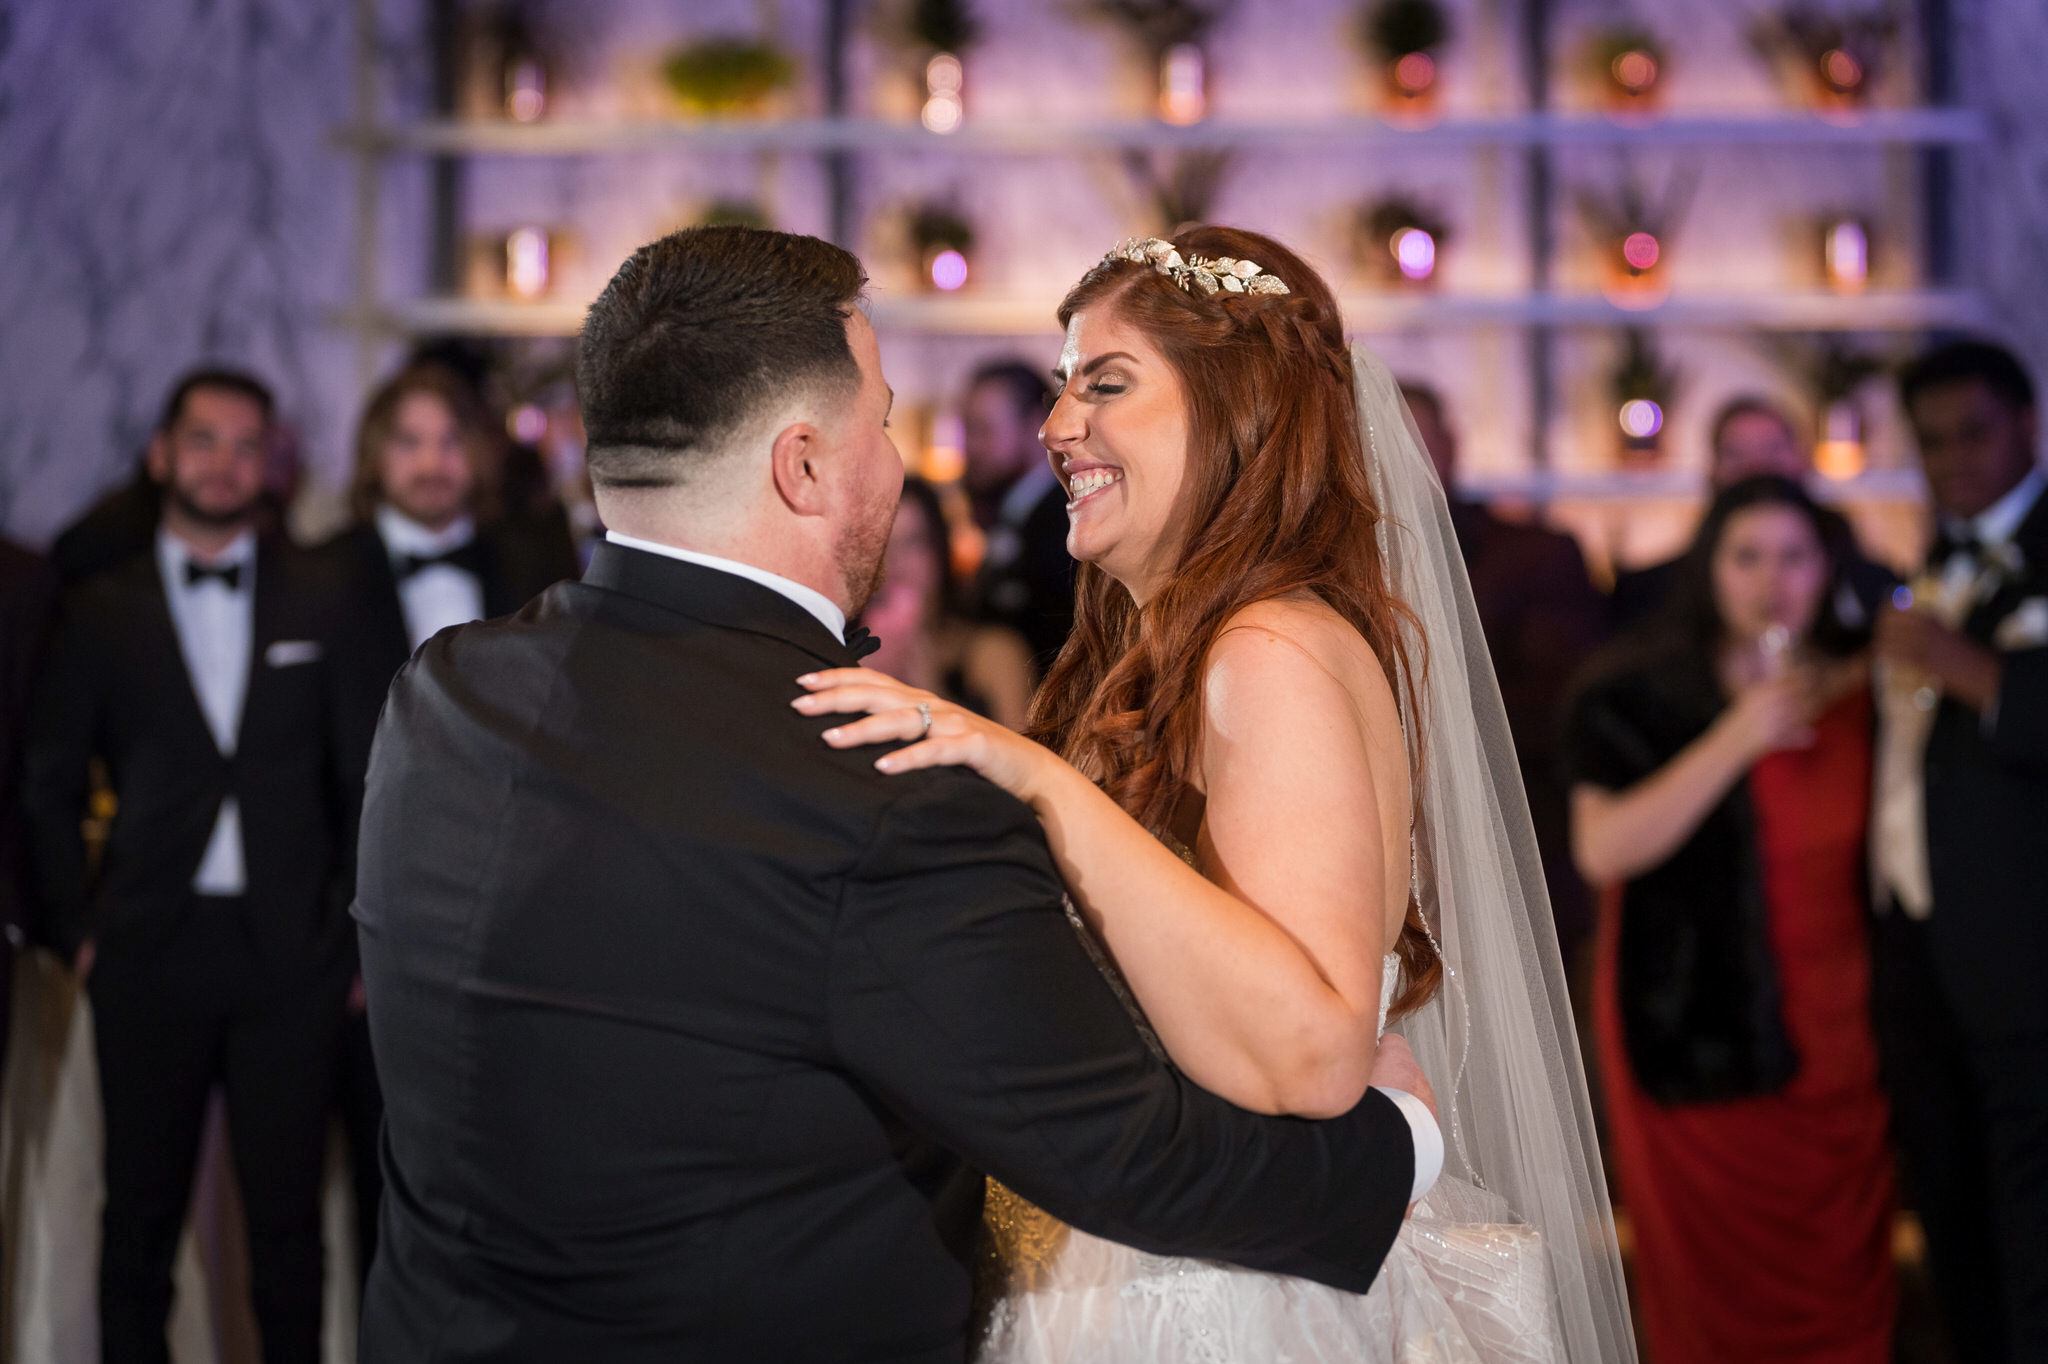 A bride and groom share a first dance at their Shinola Hotel wedding reception.